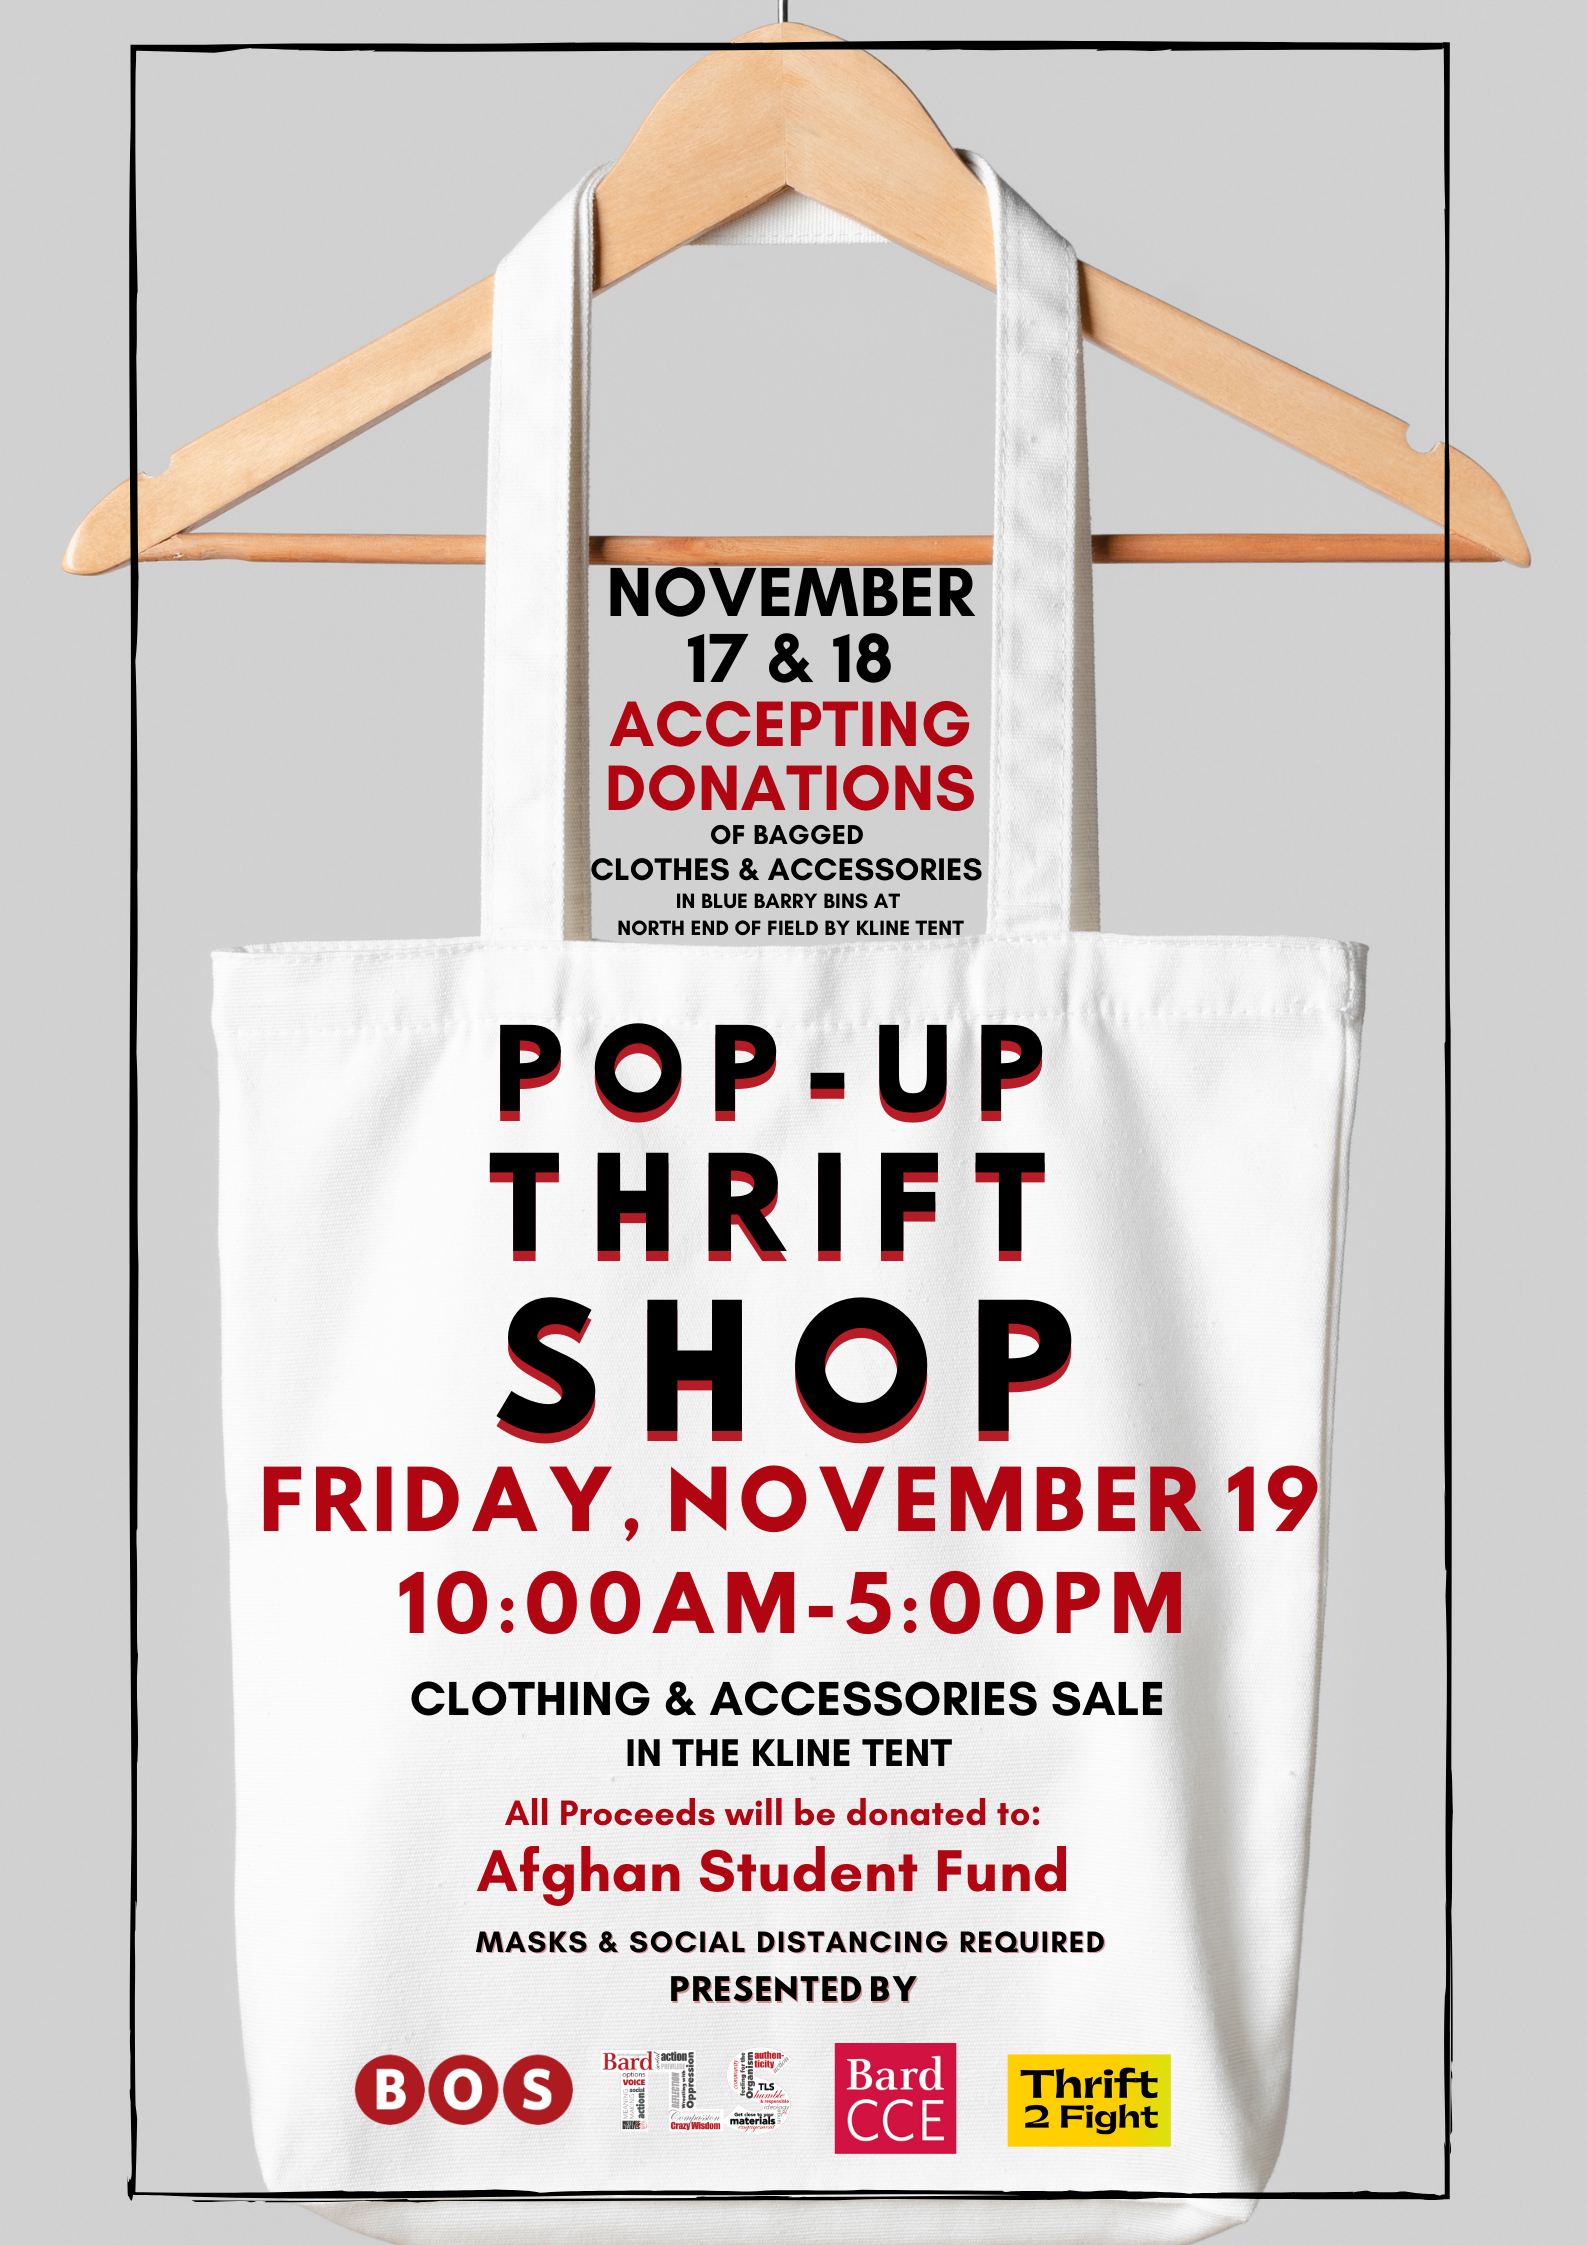 Donate to the Pop-Up Thrift Shop for Afghan Student Fund